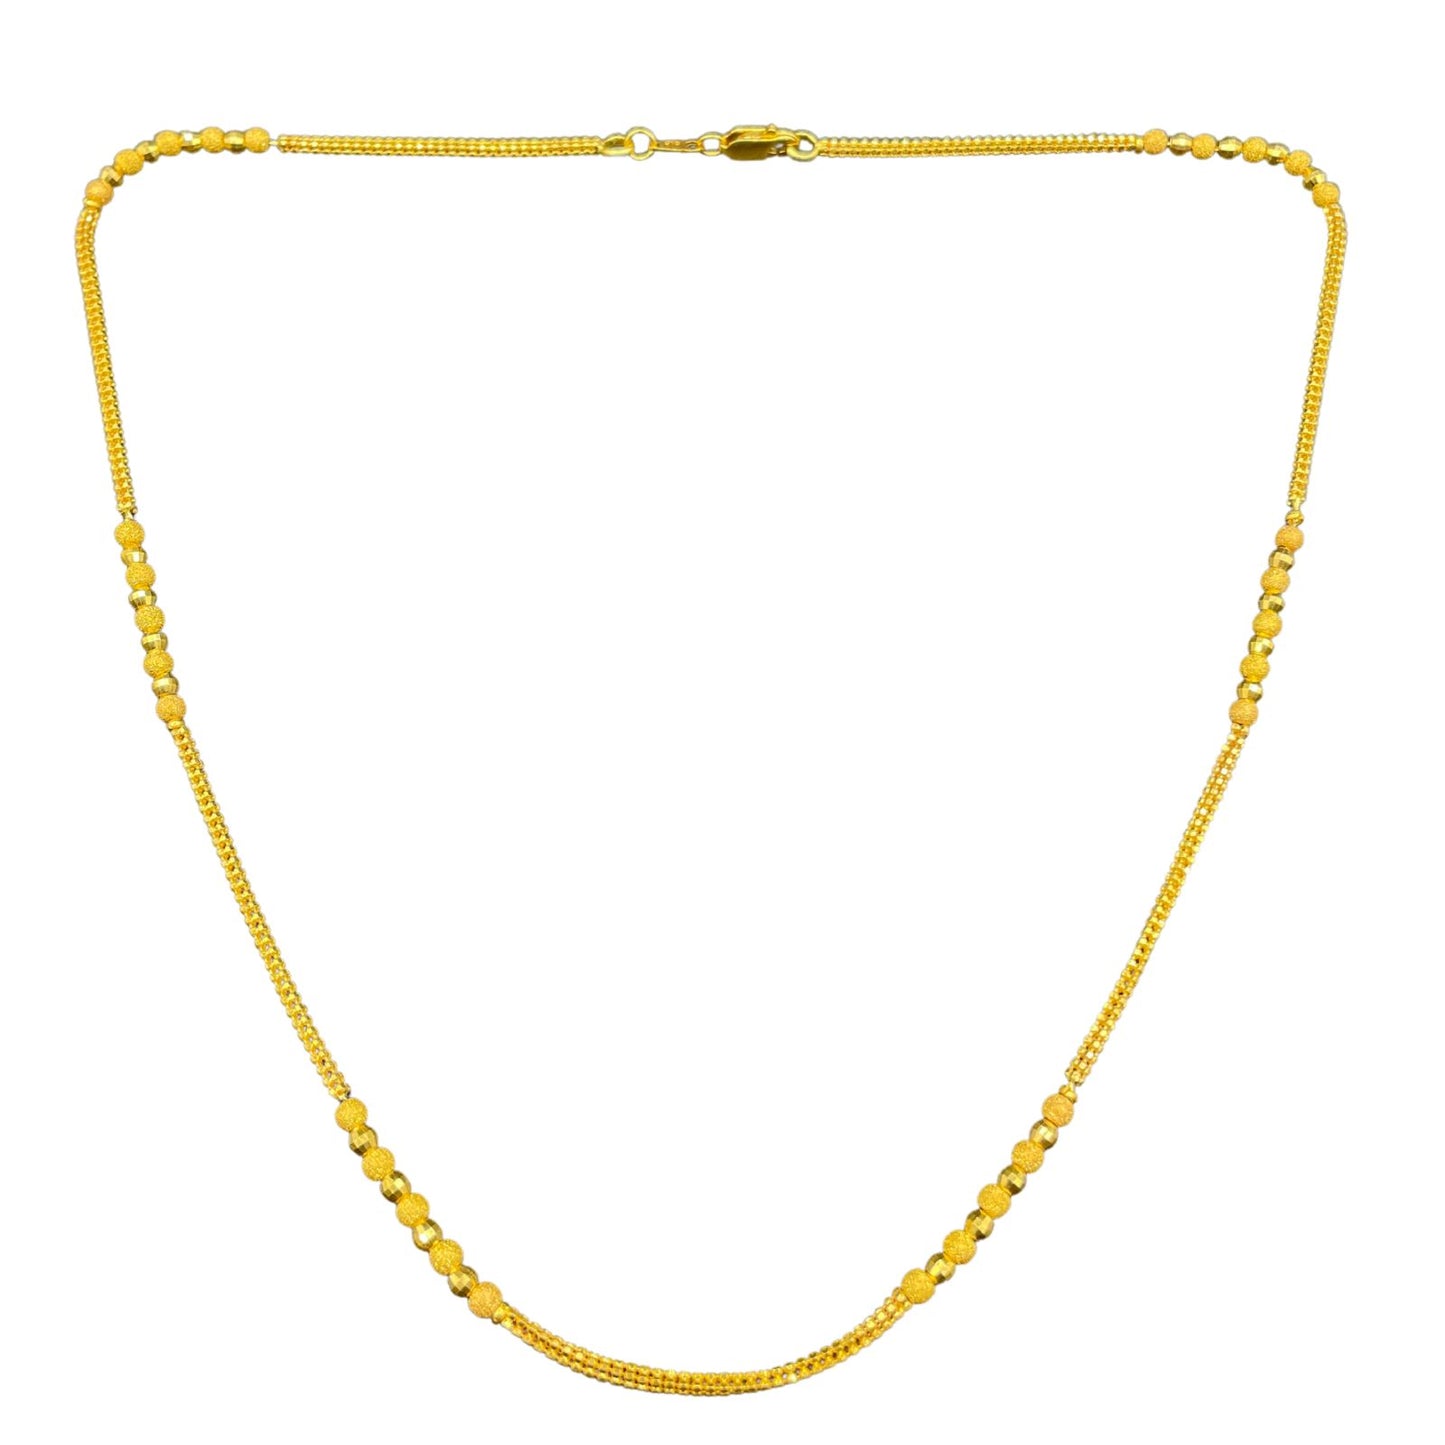 Gold Chain - Beads